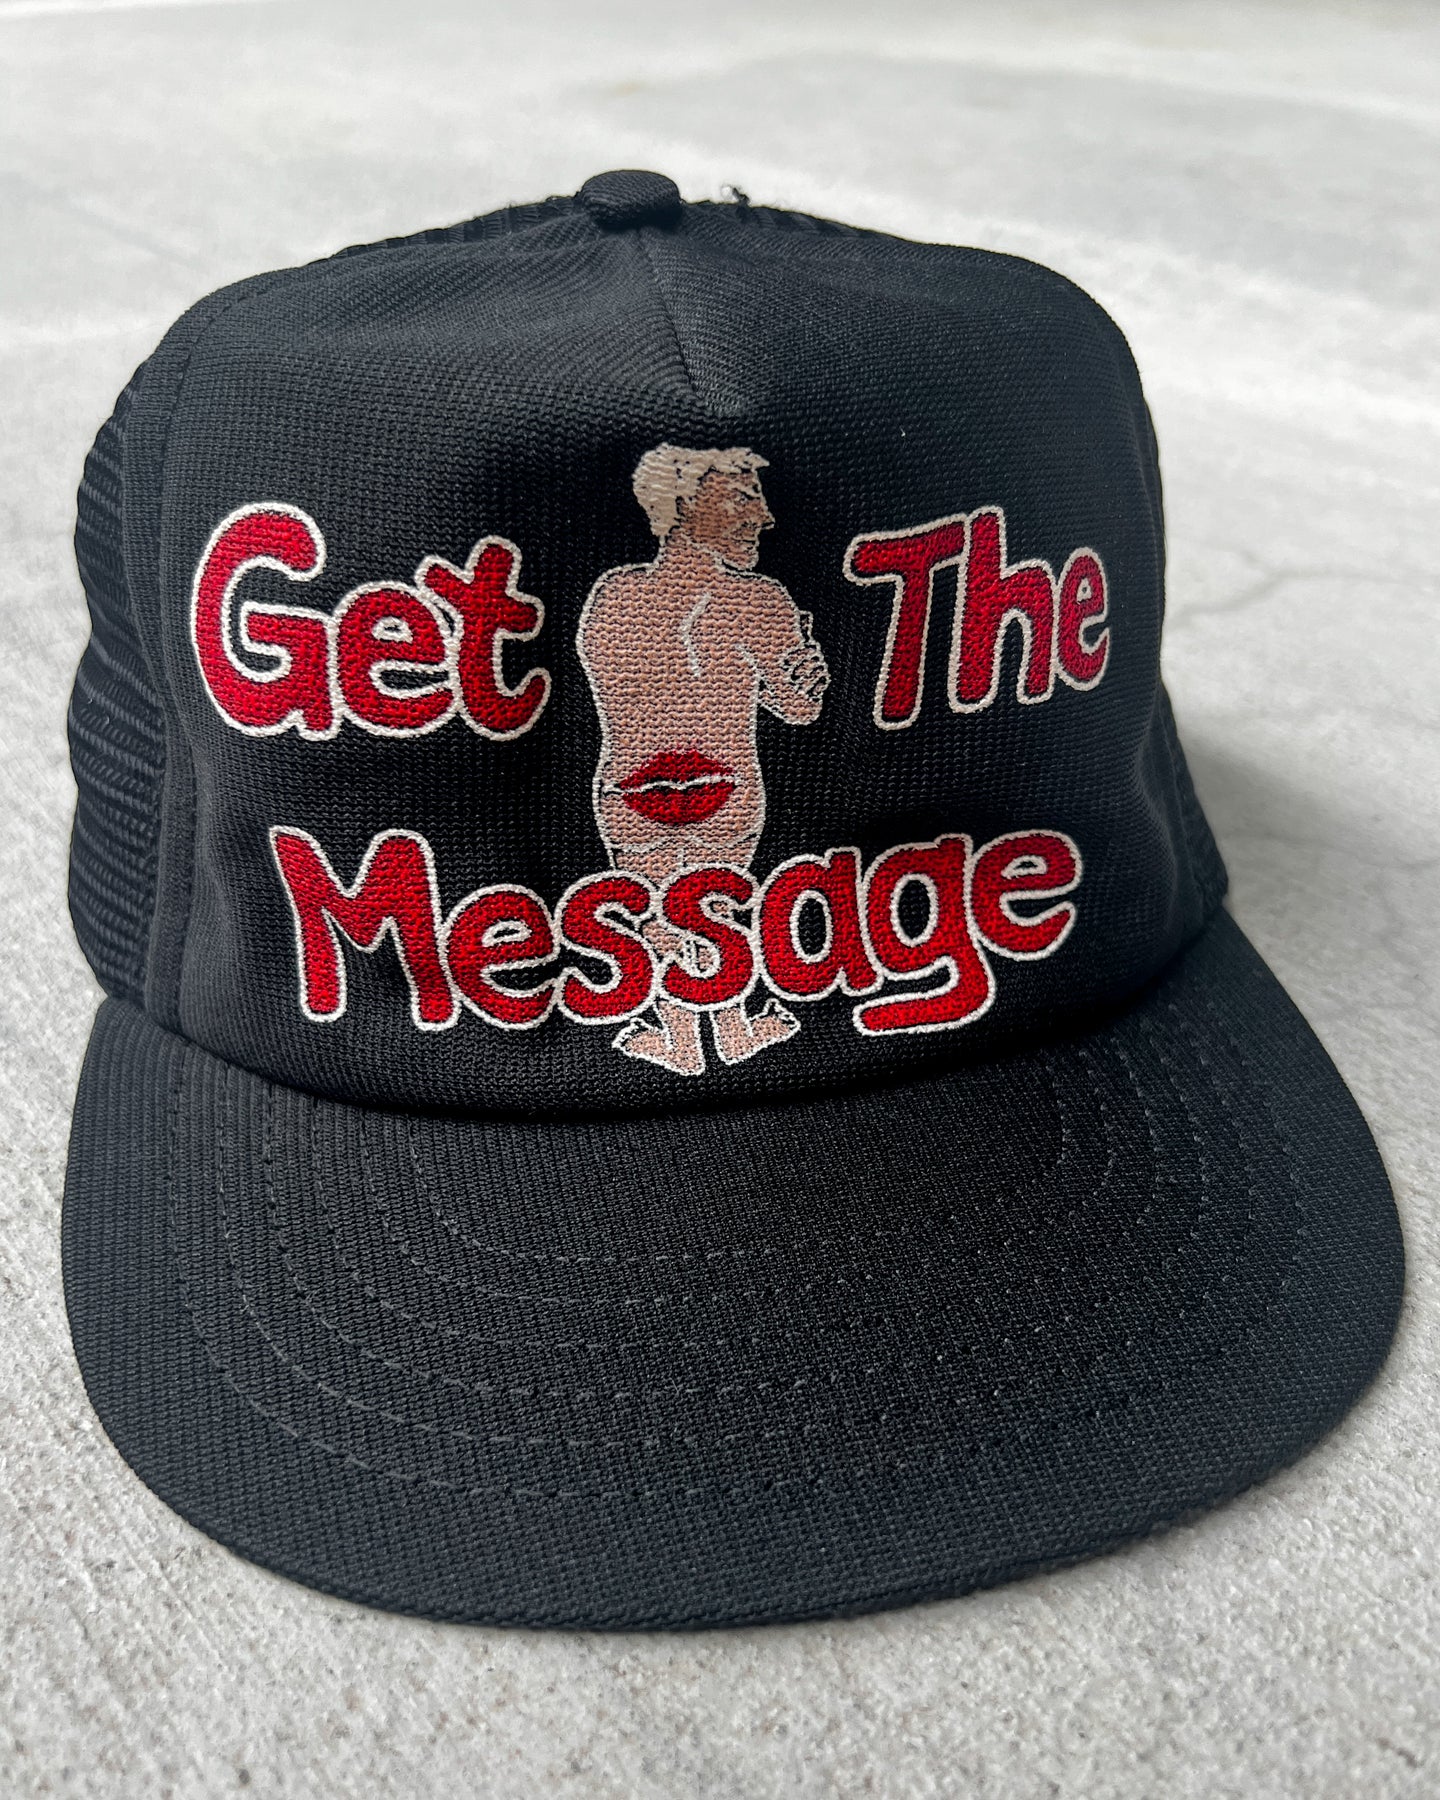 1980s Get the Message Snapback Trucker Hat - One Size